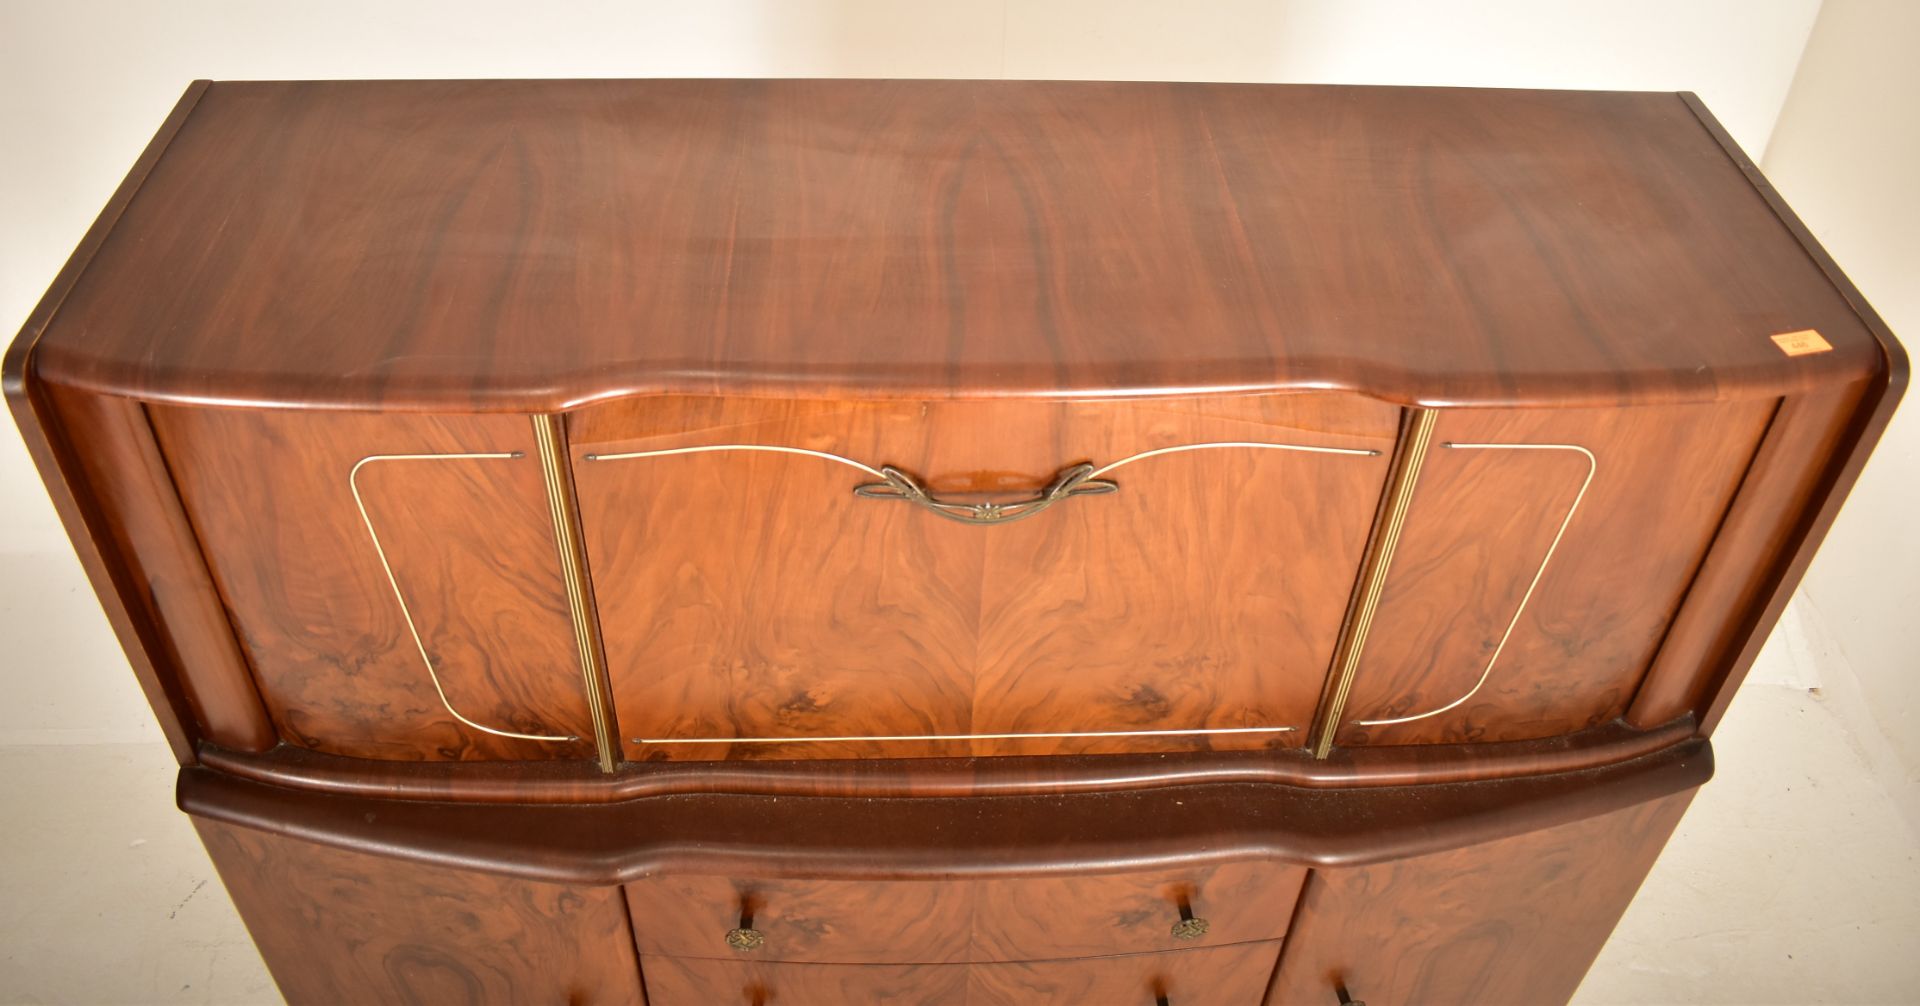 BEAUTILITY - MID CENTURY ART DECO REVIVAL WALNUT SIDEBOARD - Image 2 of 5